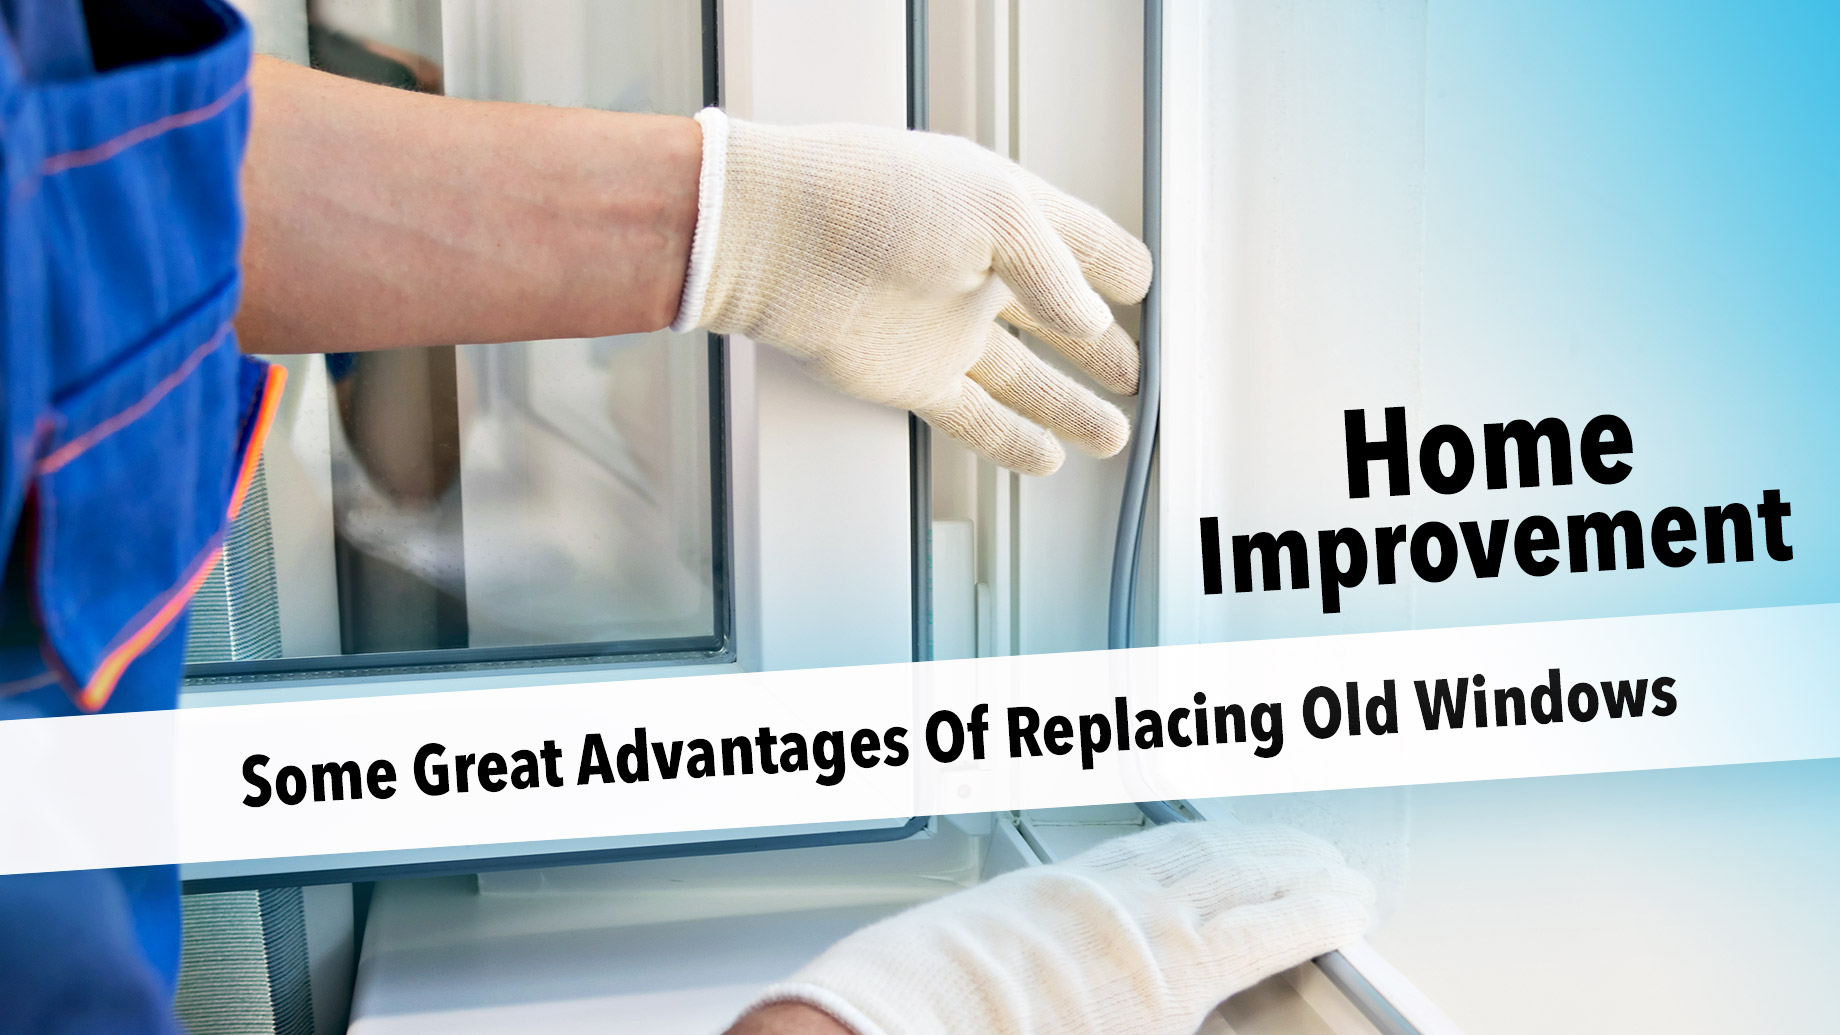 Home Improvement - Some Great Advantages Of Replacing Old Windows